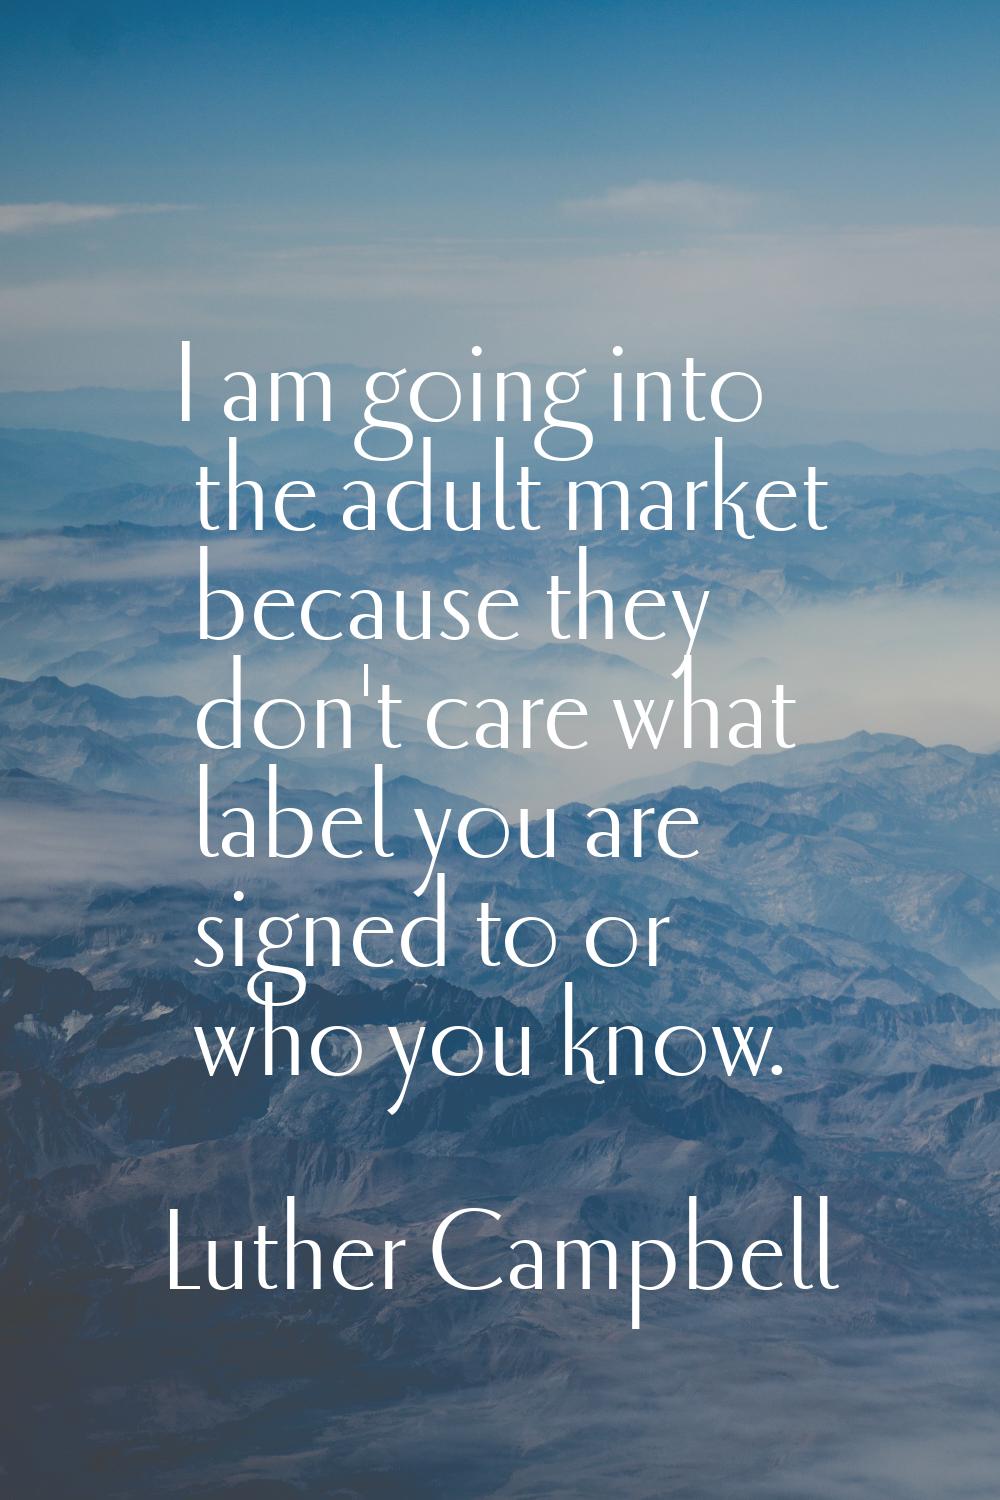 I am going into the adult market because they don't care what label you are signed to or who you kn